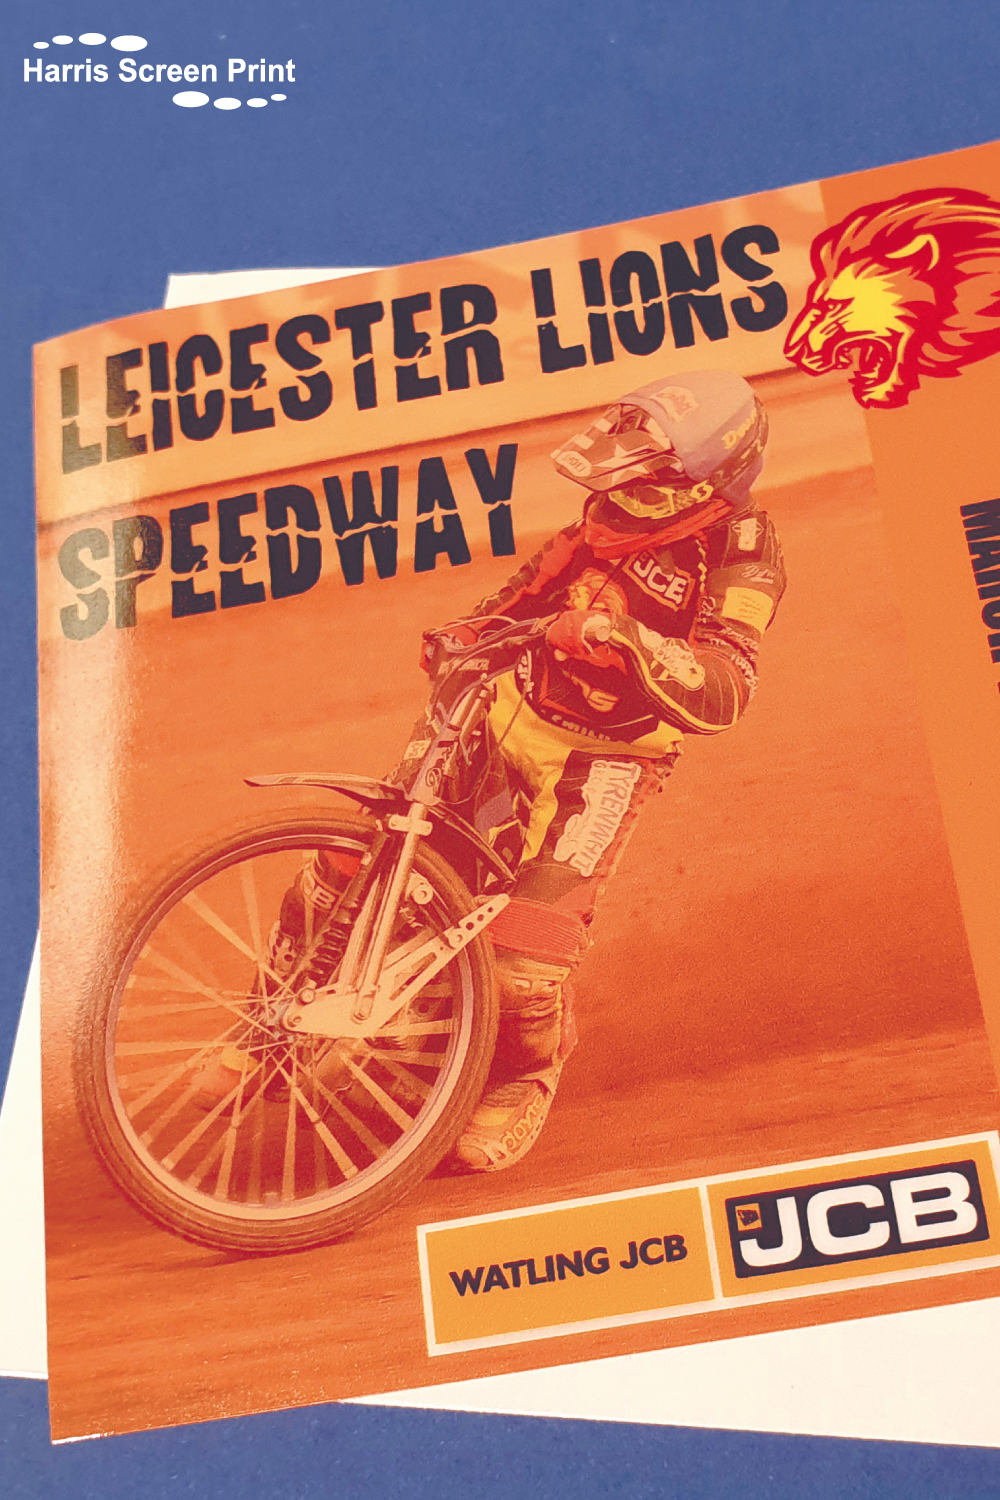 Car window stickers printed for Leicester Lions Speedway